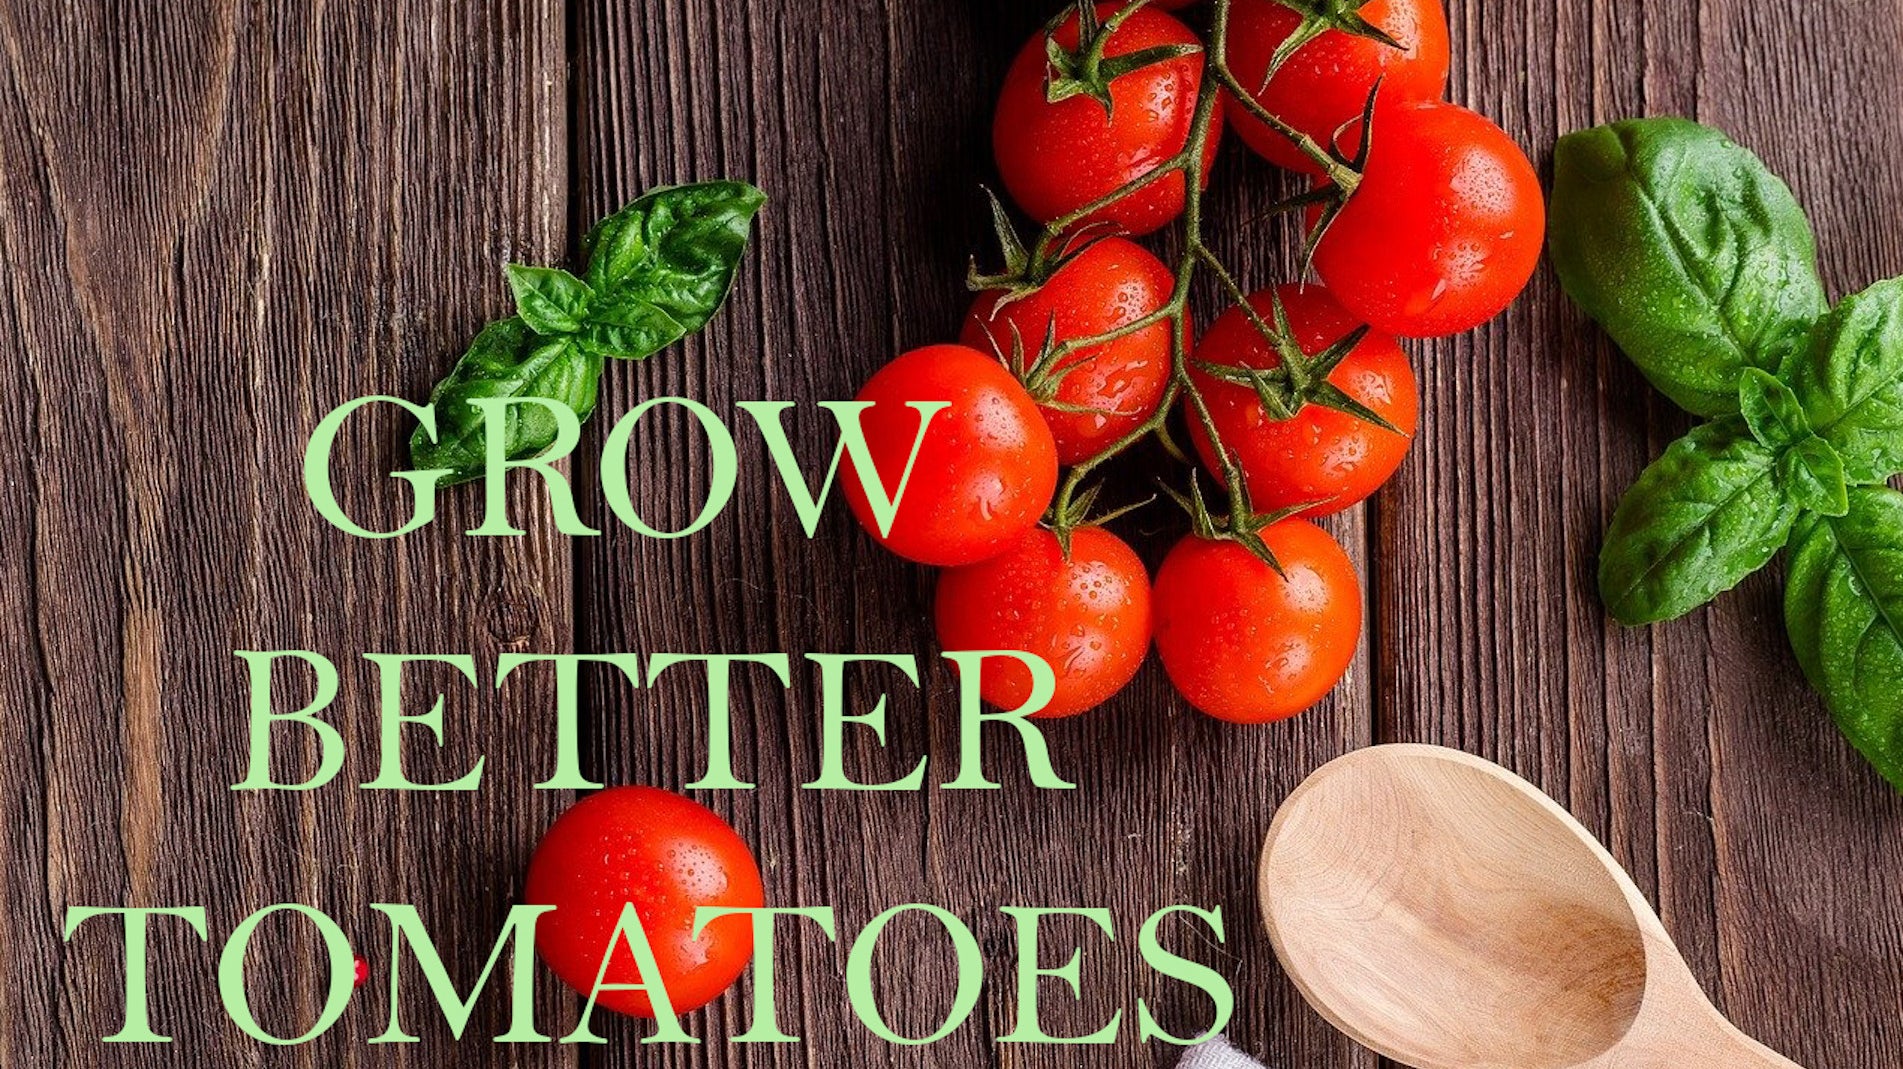 haxnicks- pot size for growing tomatoes- grow better tomatoes- tomato growing guide/tips